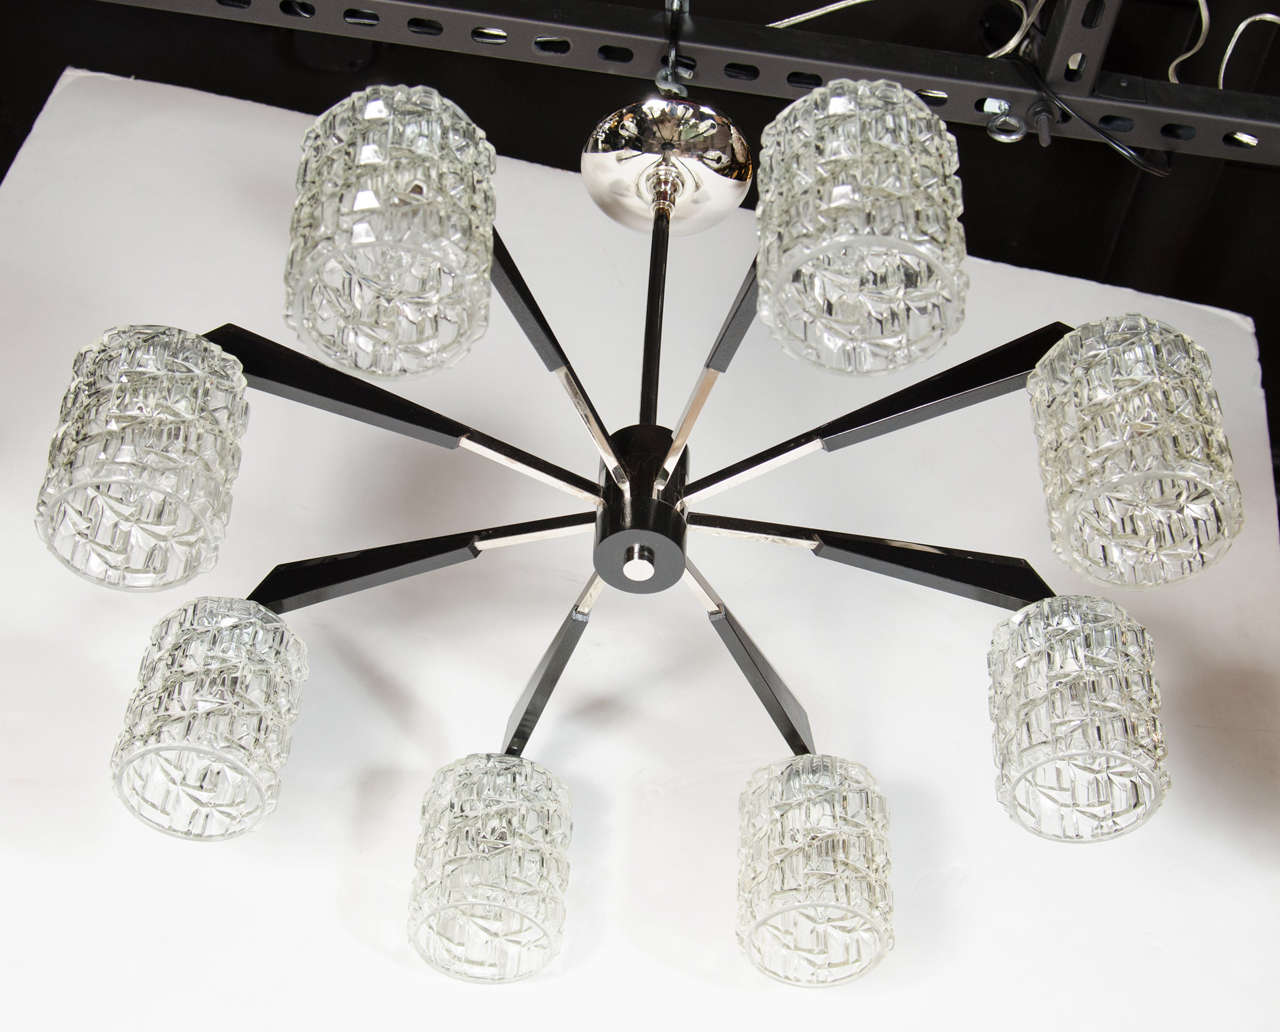 This graphic  Mid-Century Modern chandelier was realized in Denmark, circa 1960. It offers eight arms emanating from a cylindrical body in ebonized walnut with a chrome finial of the same shape adorning its base. The chrome arms have geometric